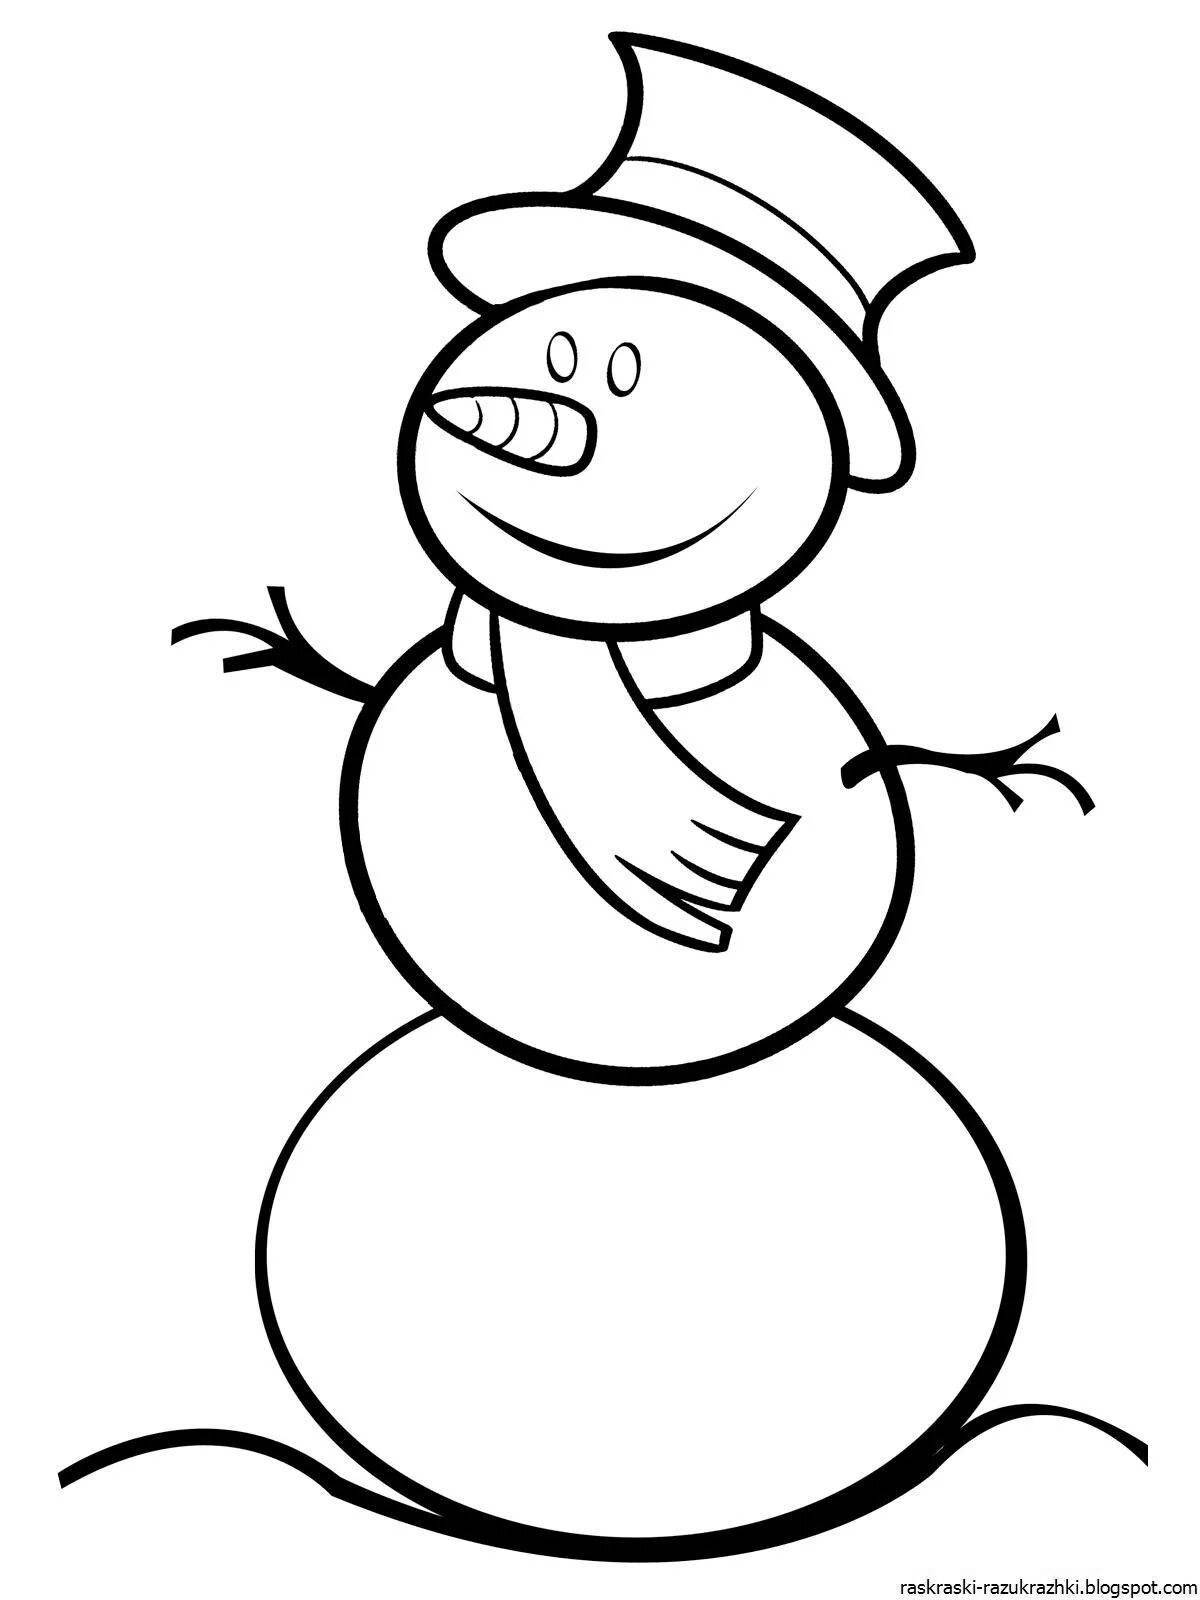 Snowman for children 2 3 years old #10